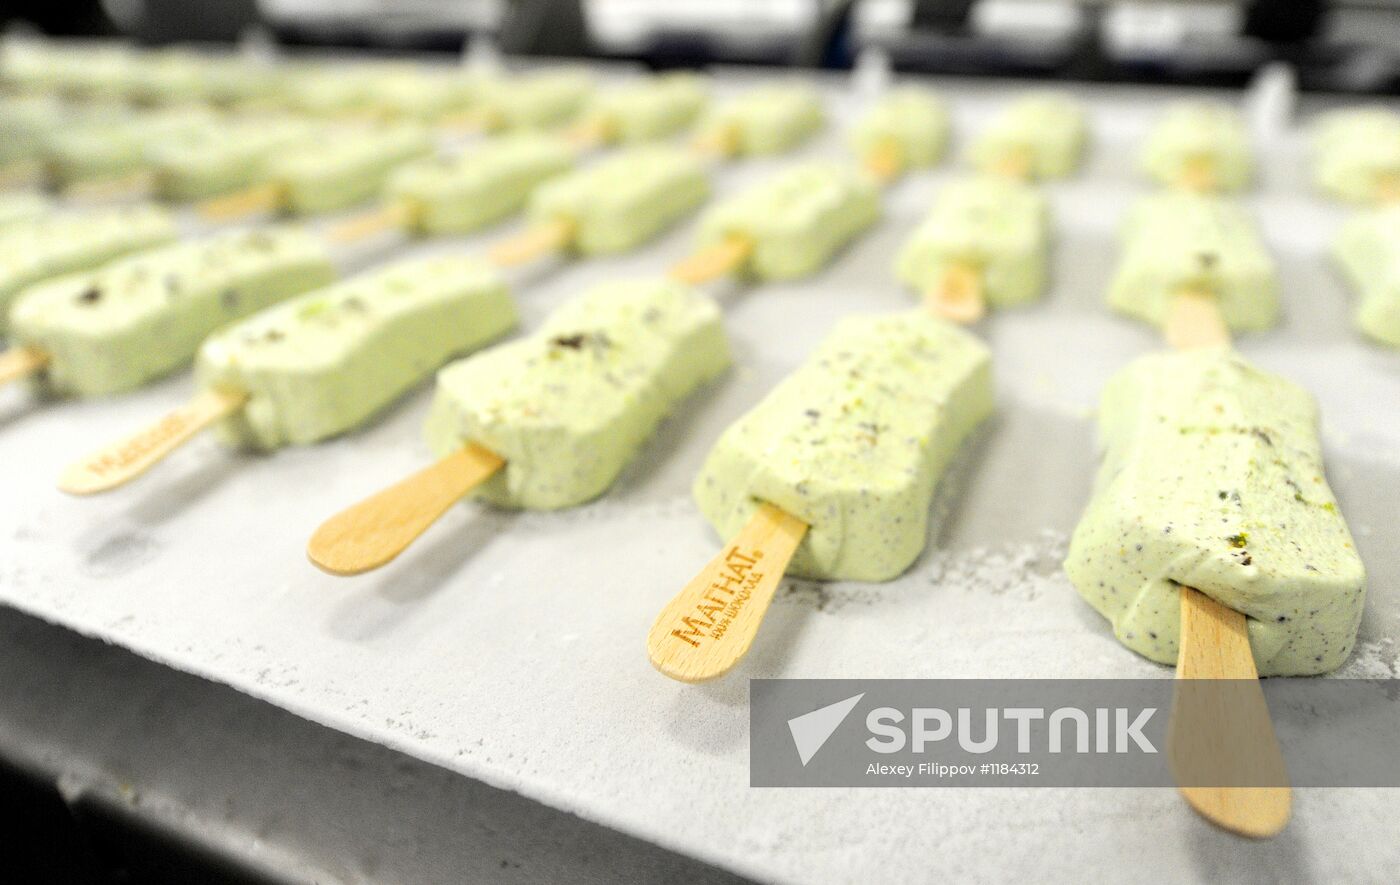 Ice-cream production at Inmarko factory